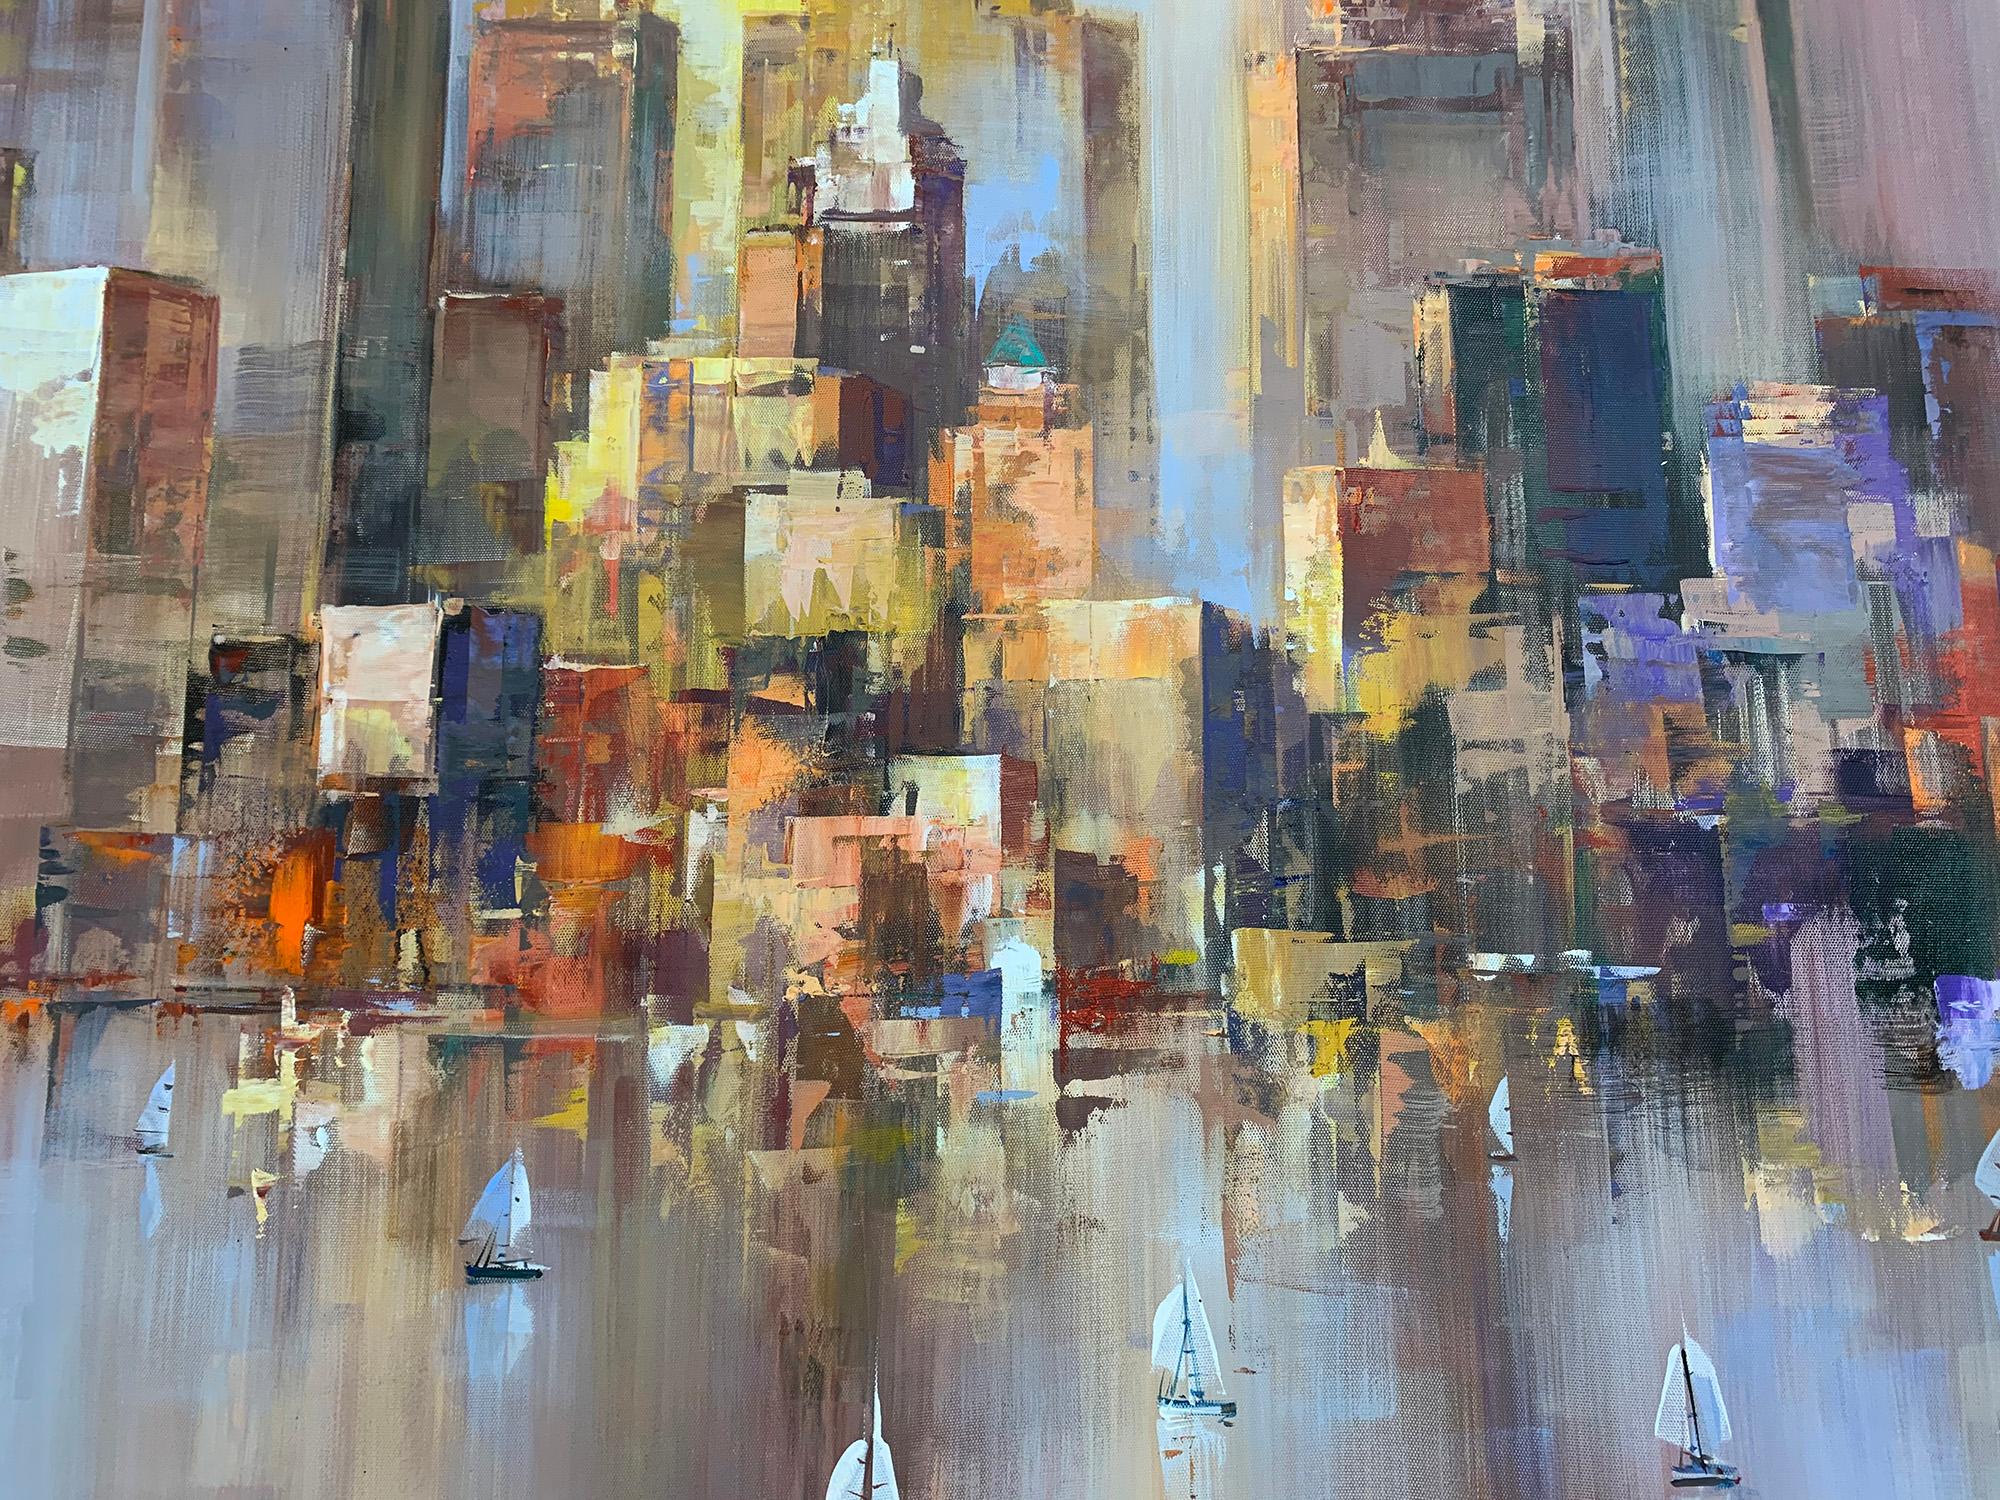 NY Skyline at dusk - landscape painting - Painting by Wilfred Lang